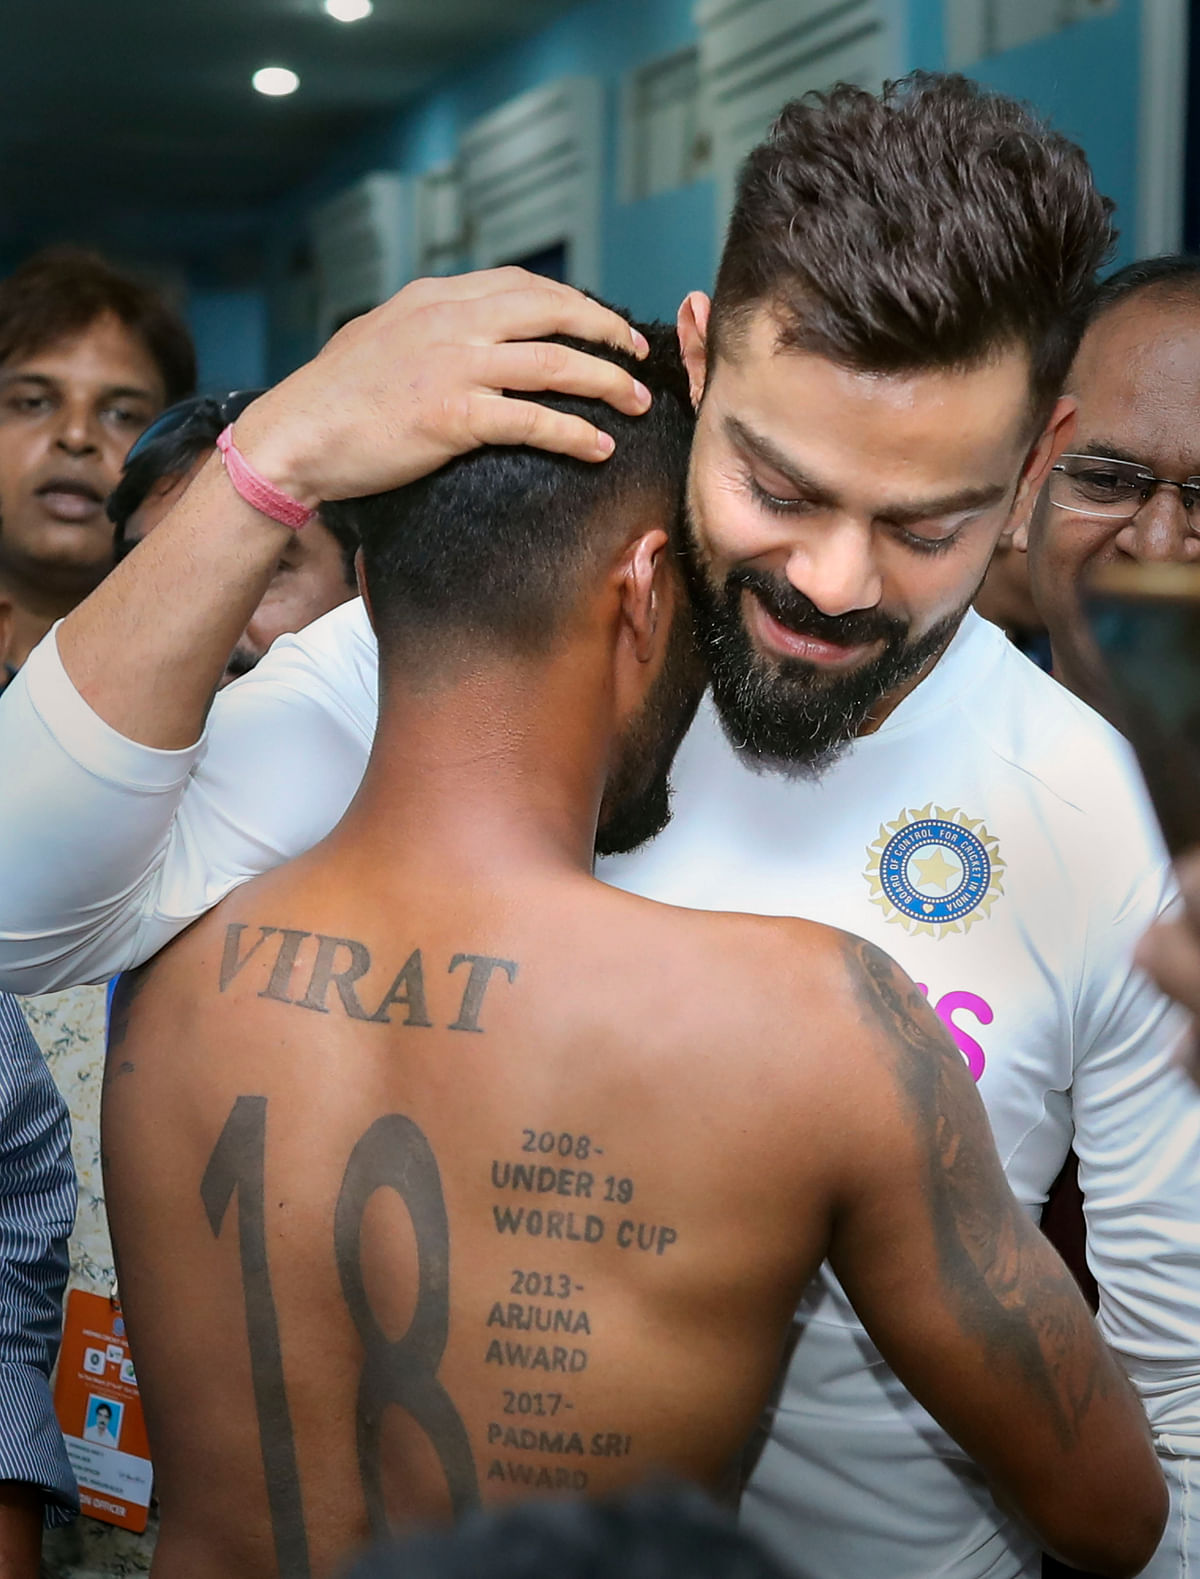 The said fan was seen sporting a tattoo of Virat’s face on his chest.